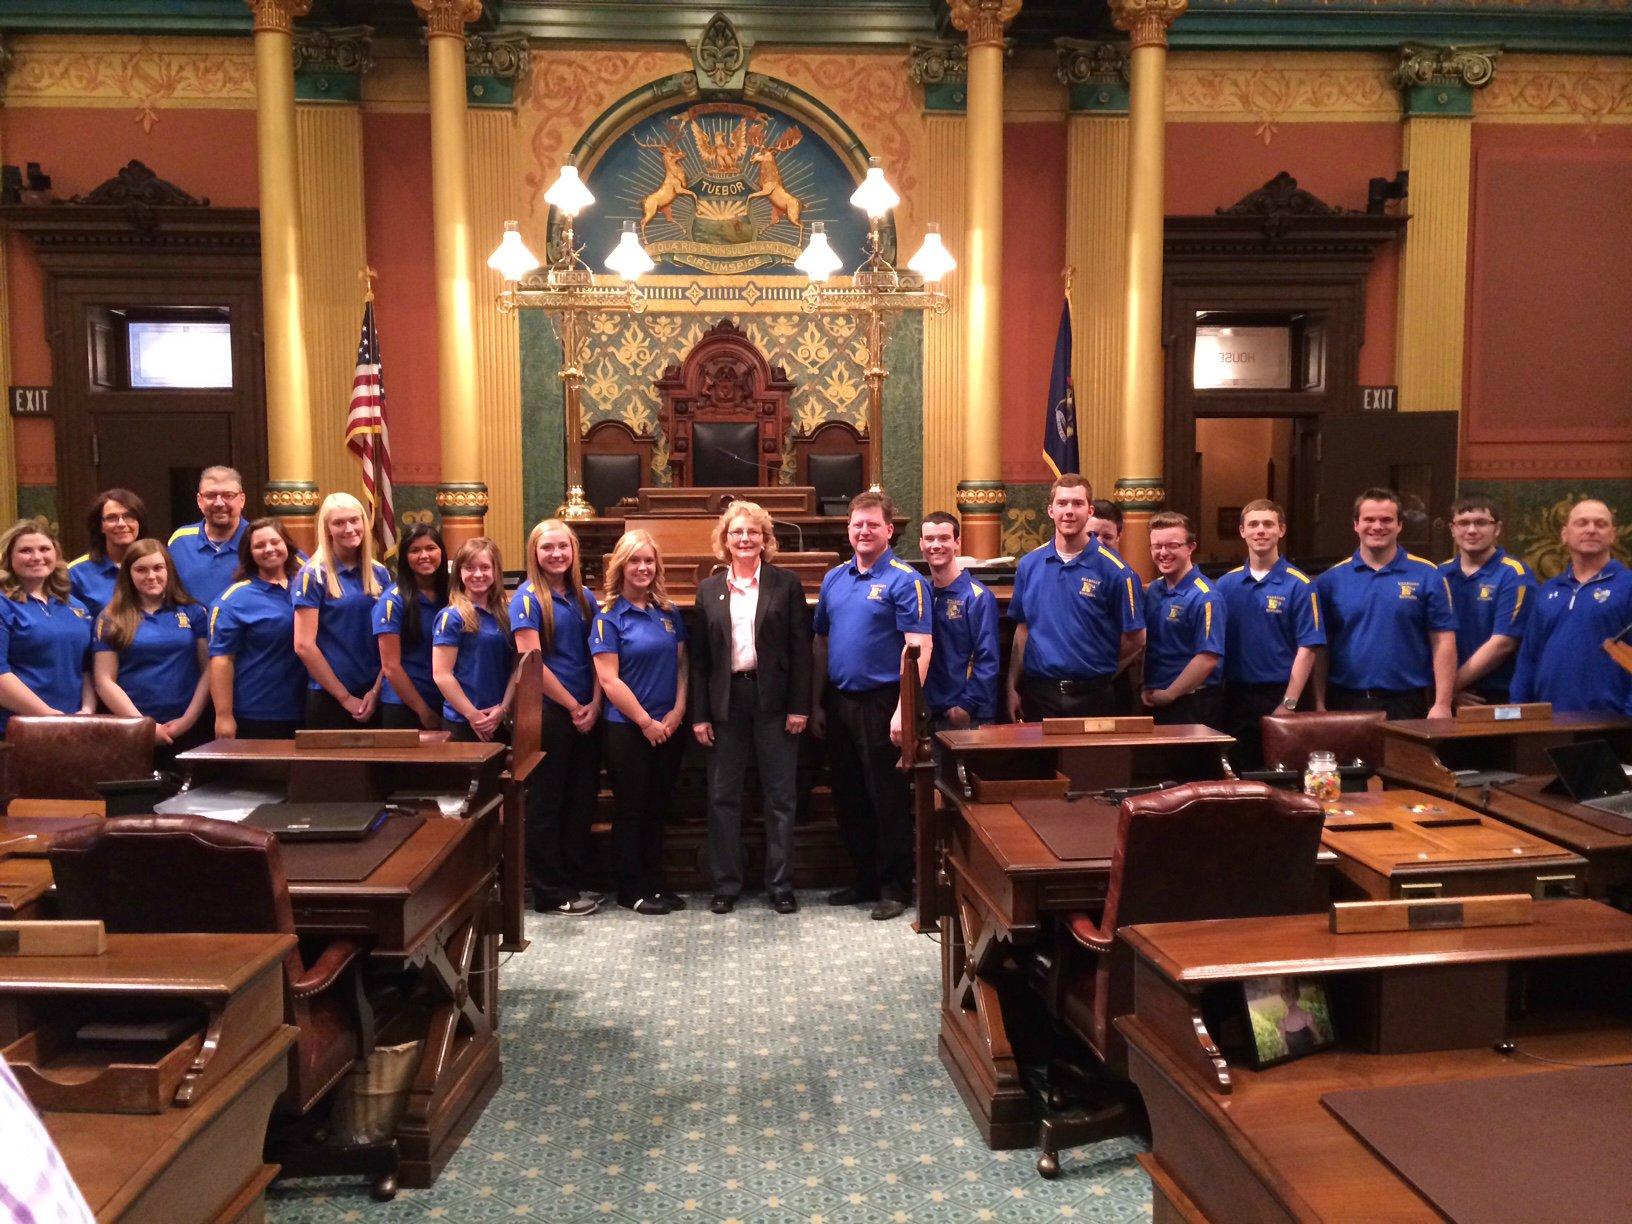 The bowling teams toured the state Capitol and were recognized by the House after being introduced by Rep. Pam Faris (D-Clio).